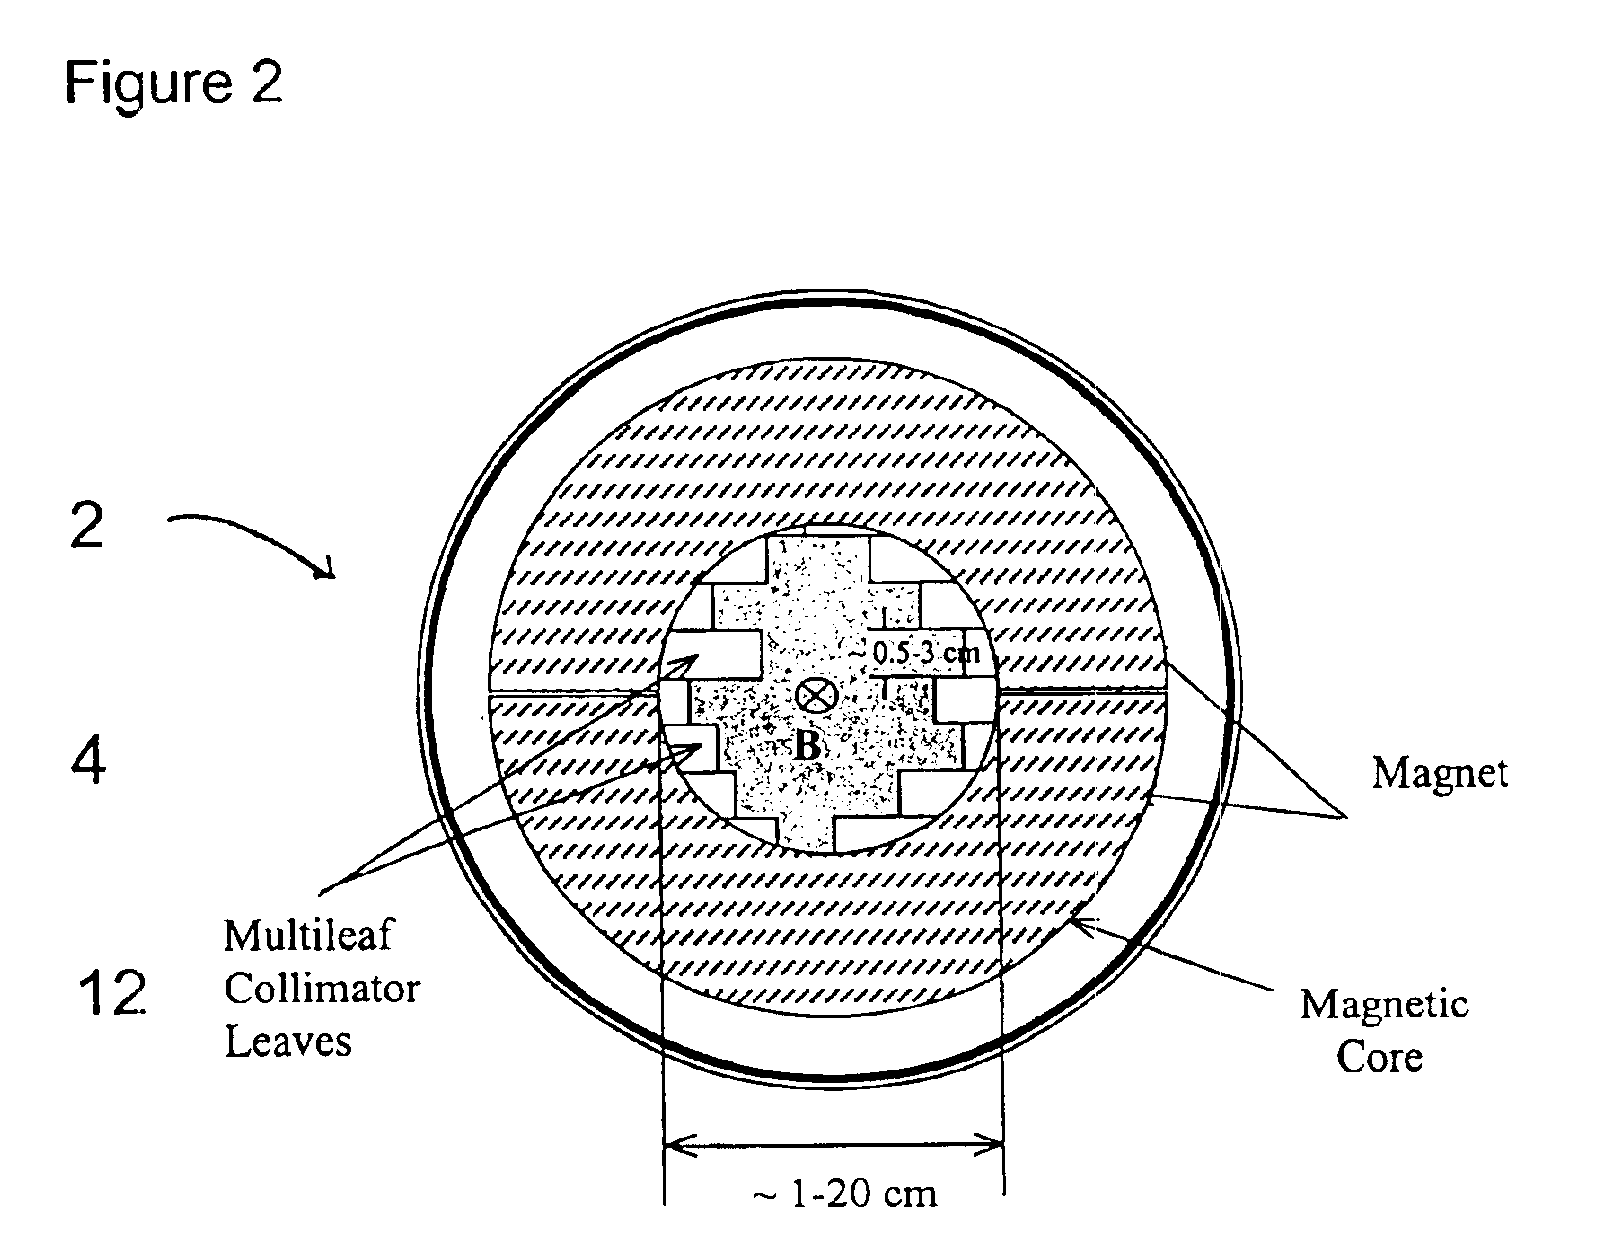 Helical electron beam generating device and method of use